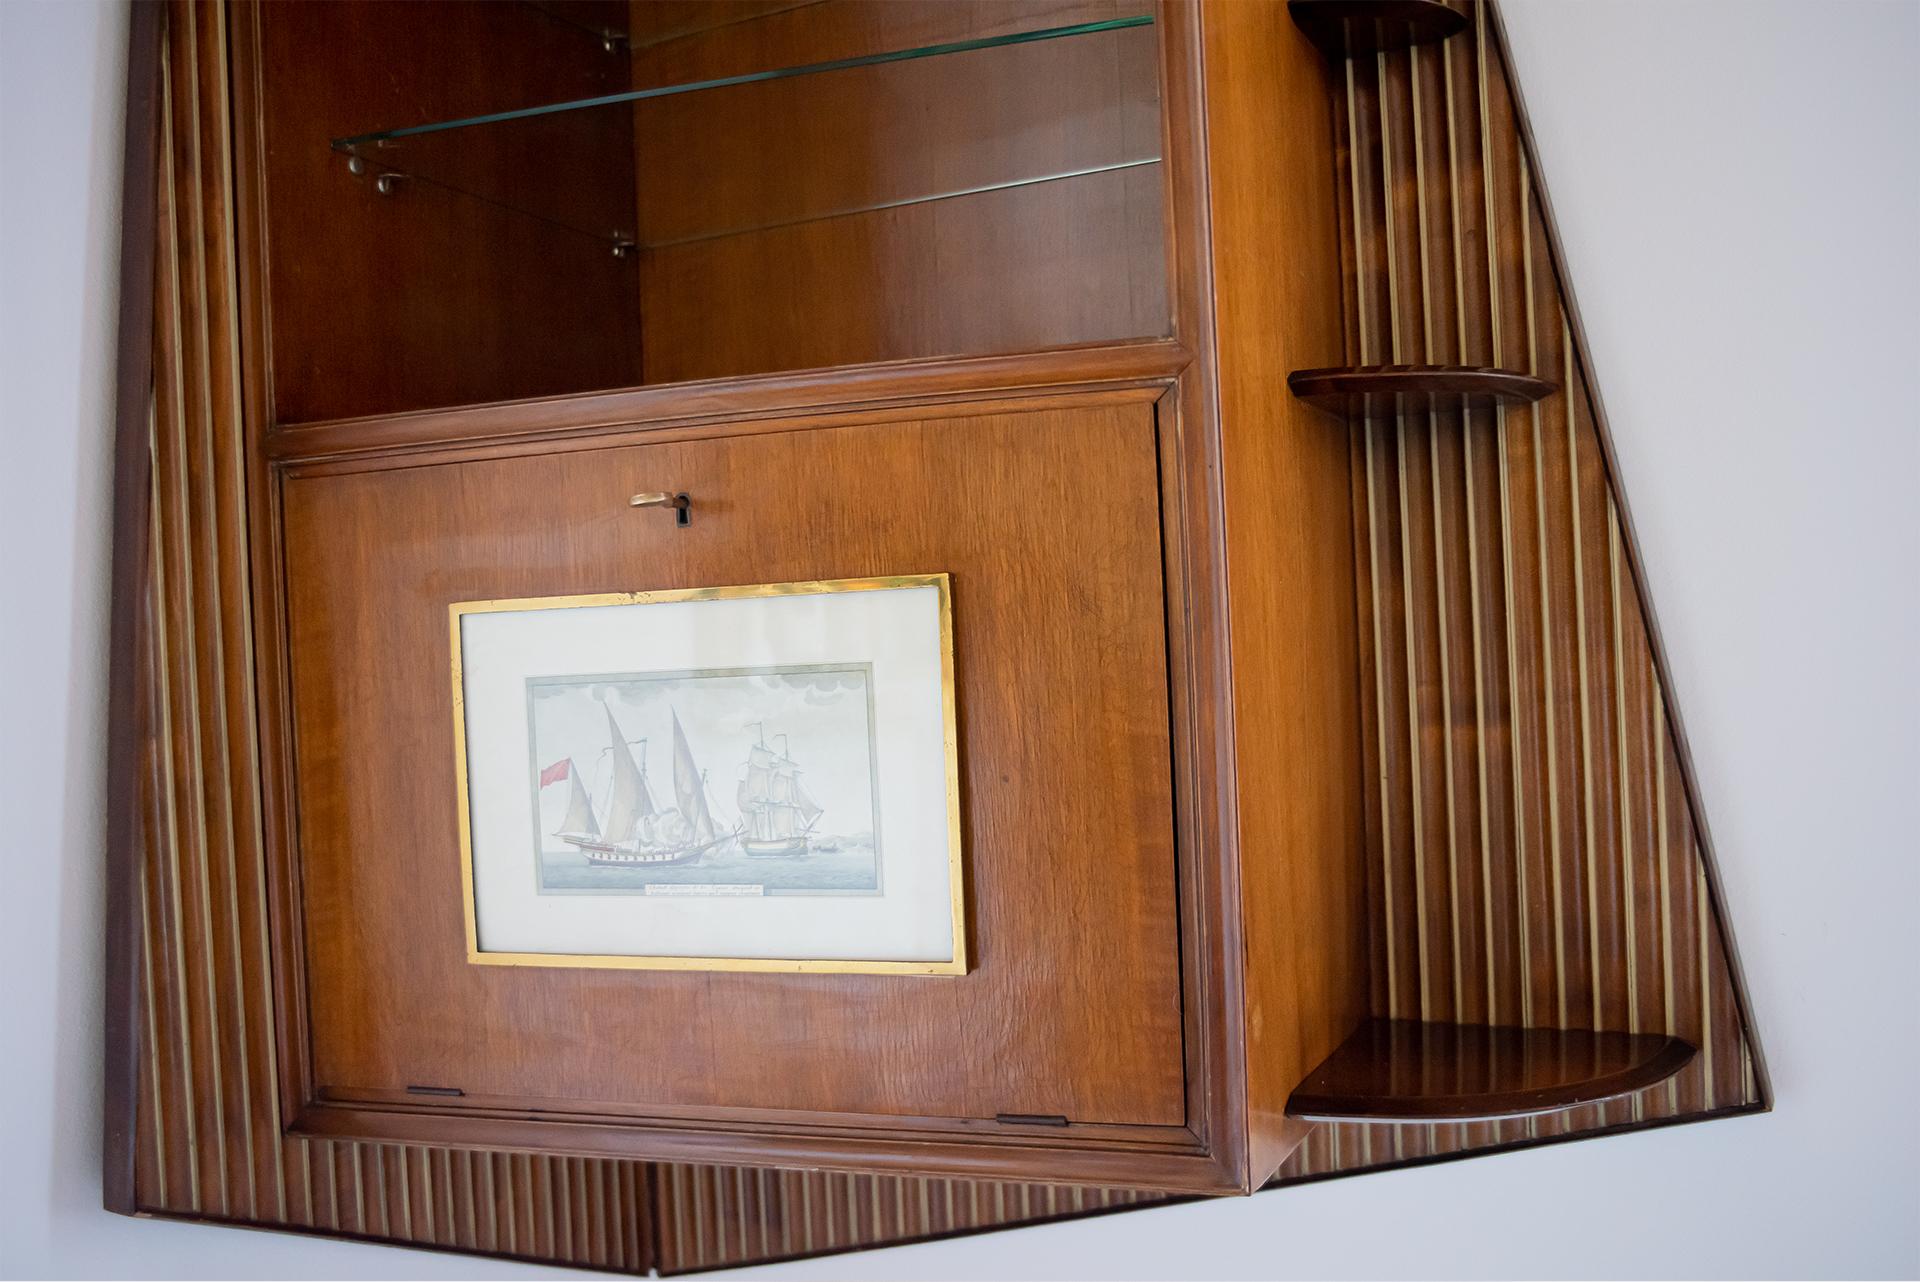 Fluted mahogany, brass details and glass shelves.
The light is electrified for European standards. Includes original key and print of the naval scene.

